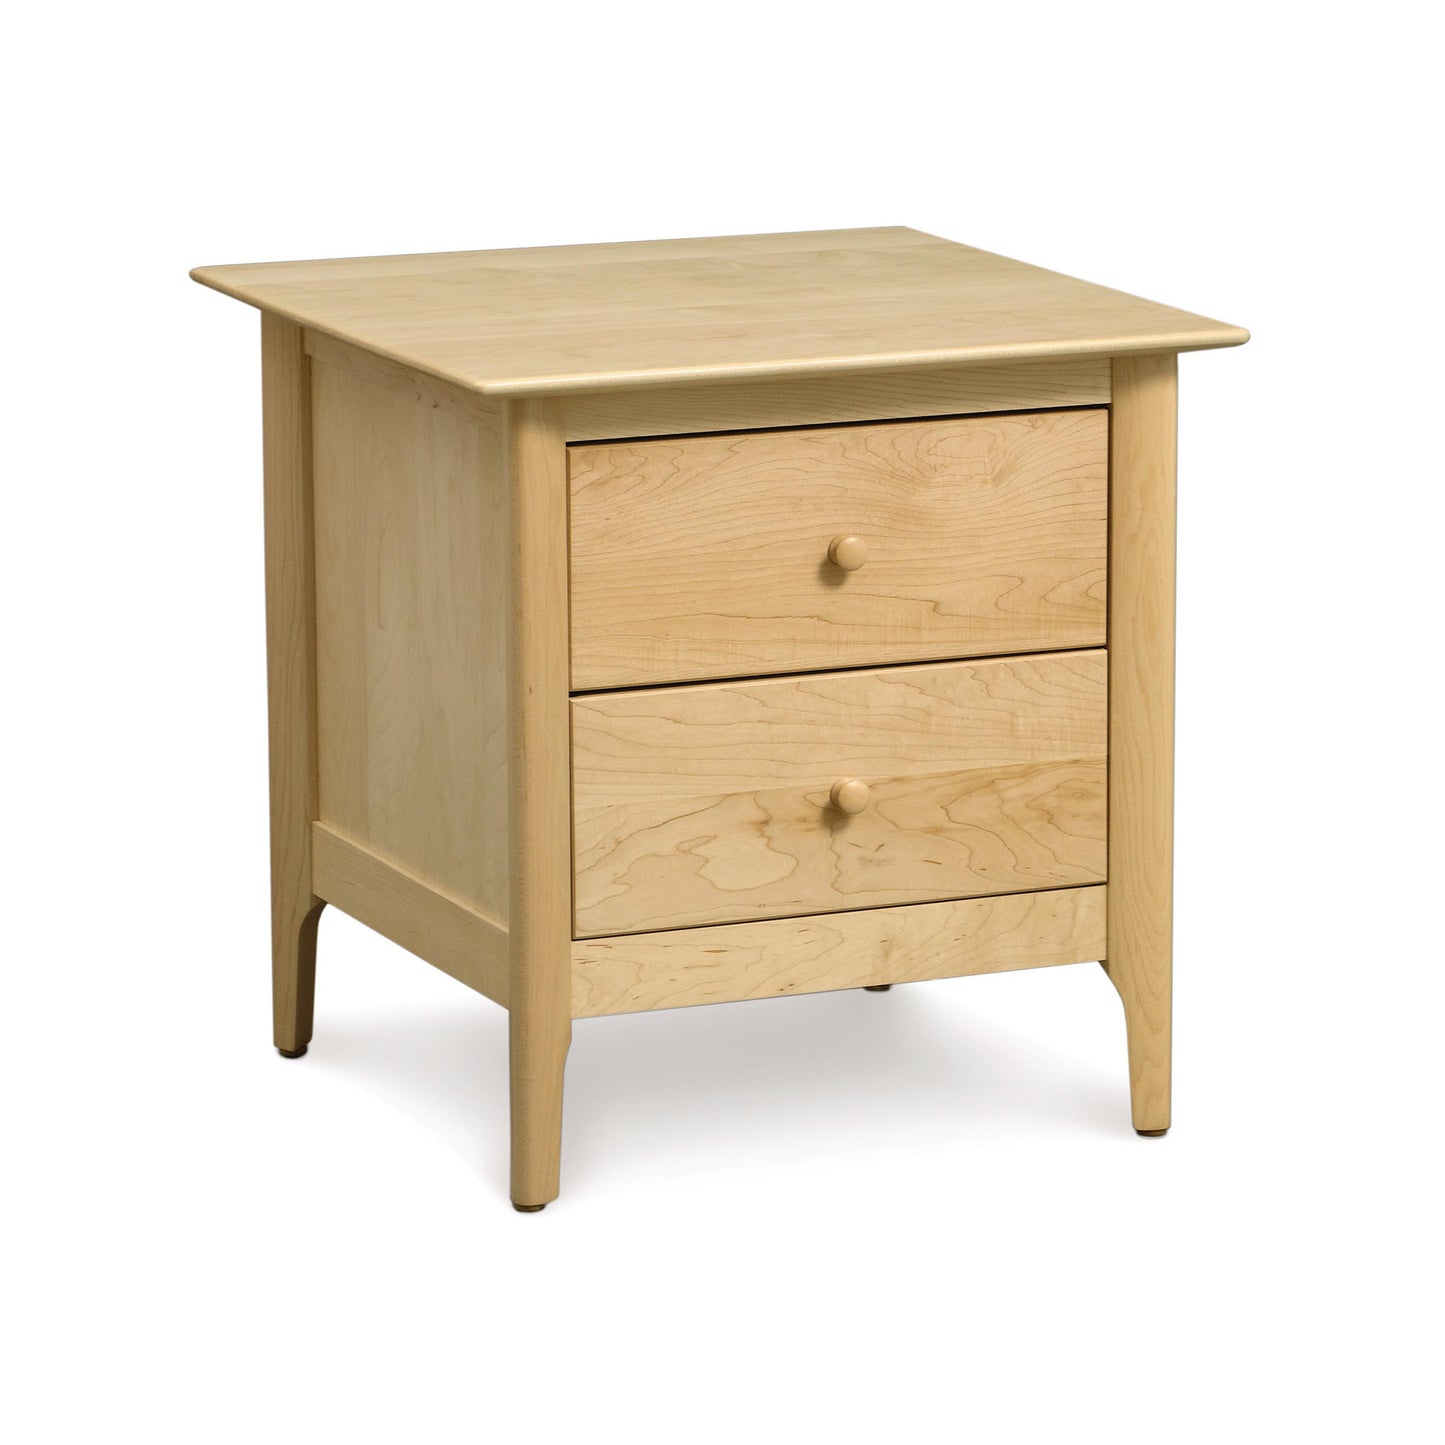 The Sarah 2-Drawer Nightstand from the Shaker-style Copeland Furniture Collection. Handmade in Vermont.